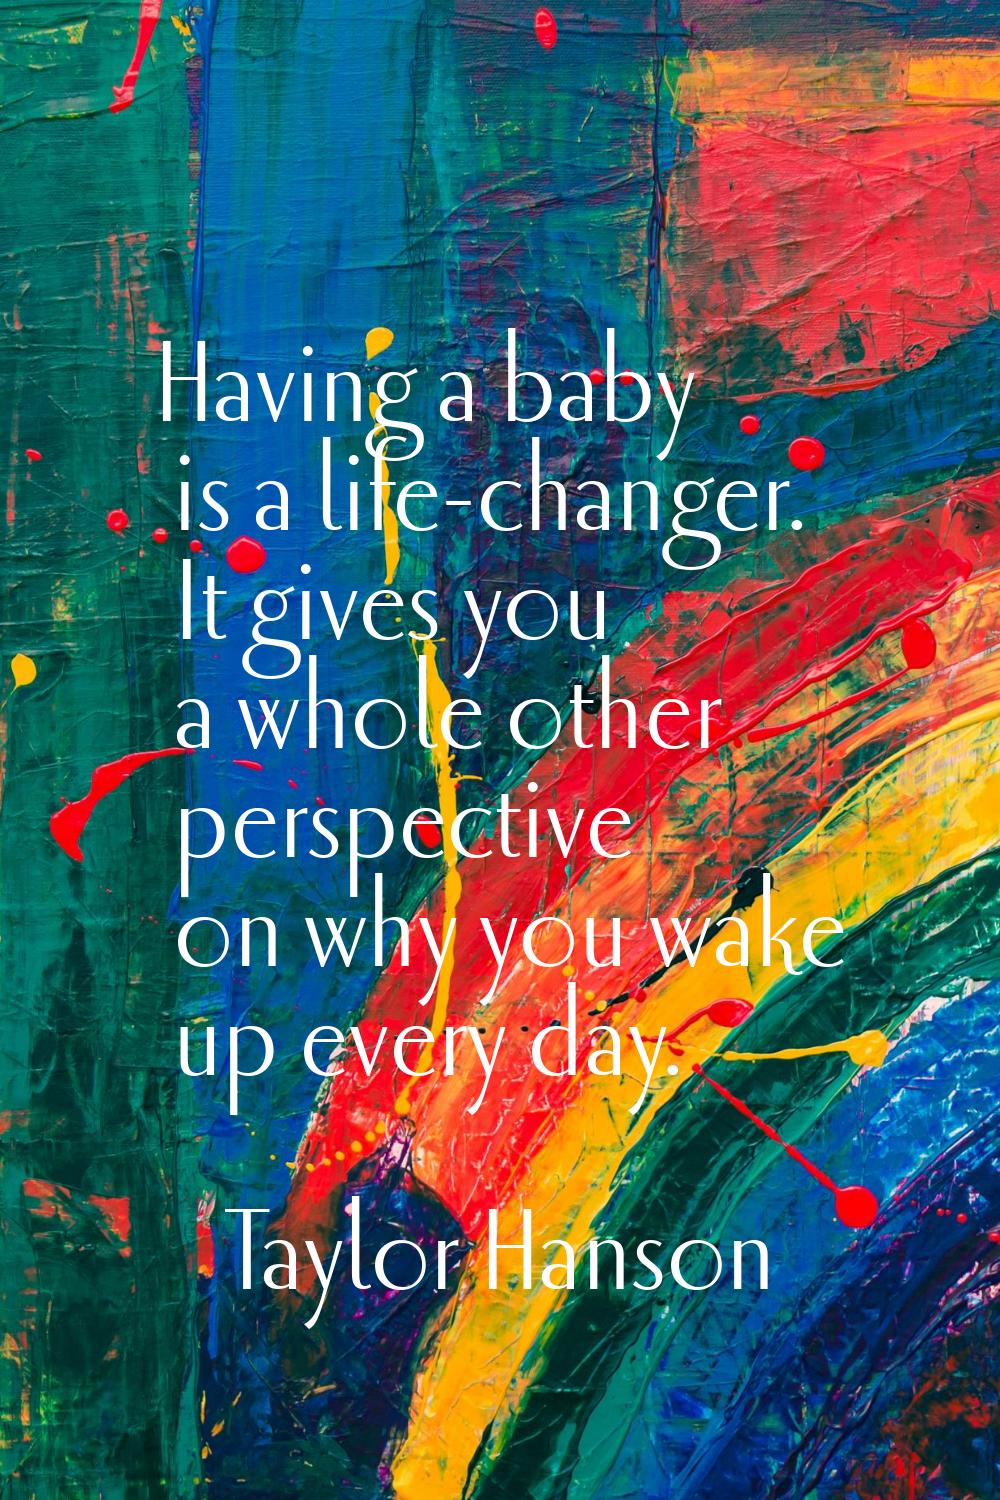 Having a baby is a life-changer. It gives you a whole other perspective on why you wake up every da